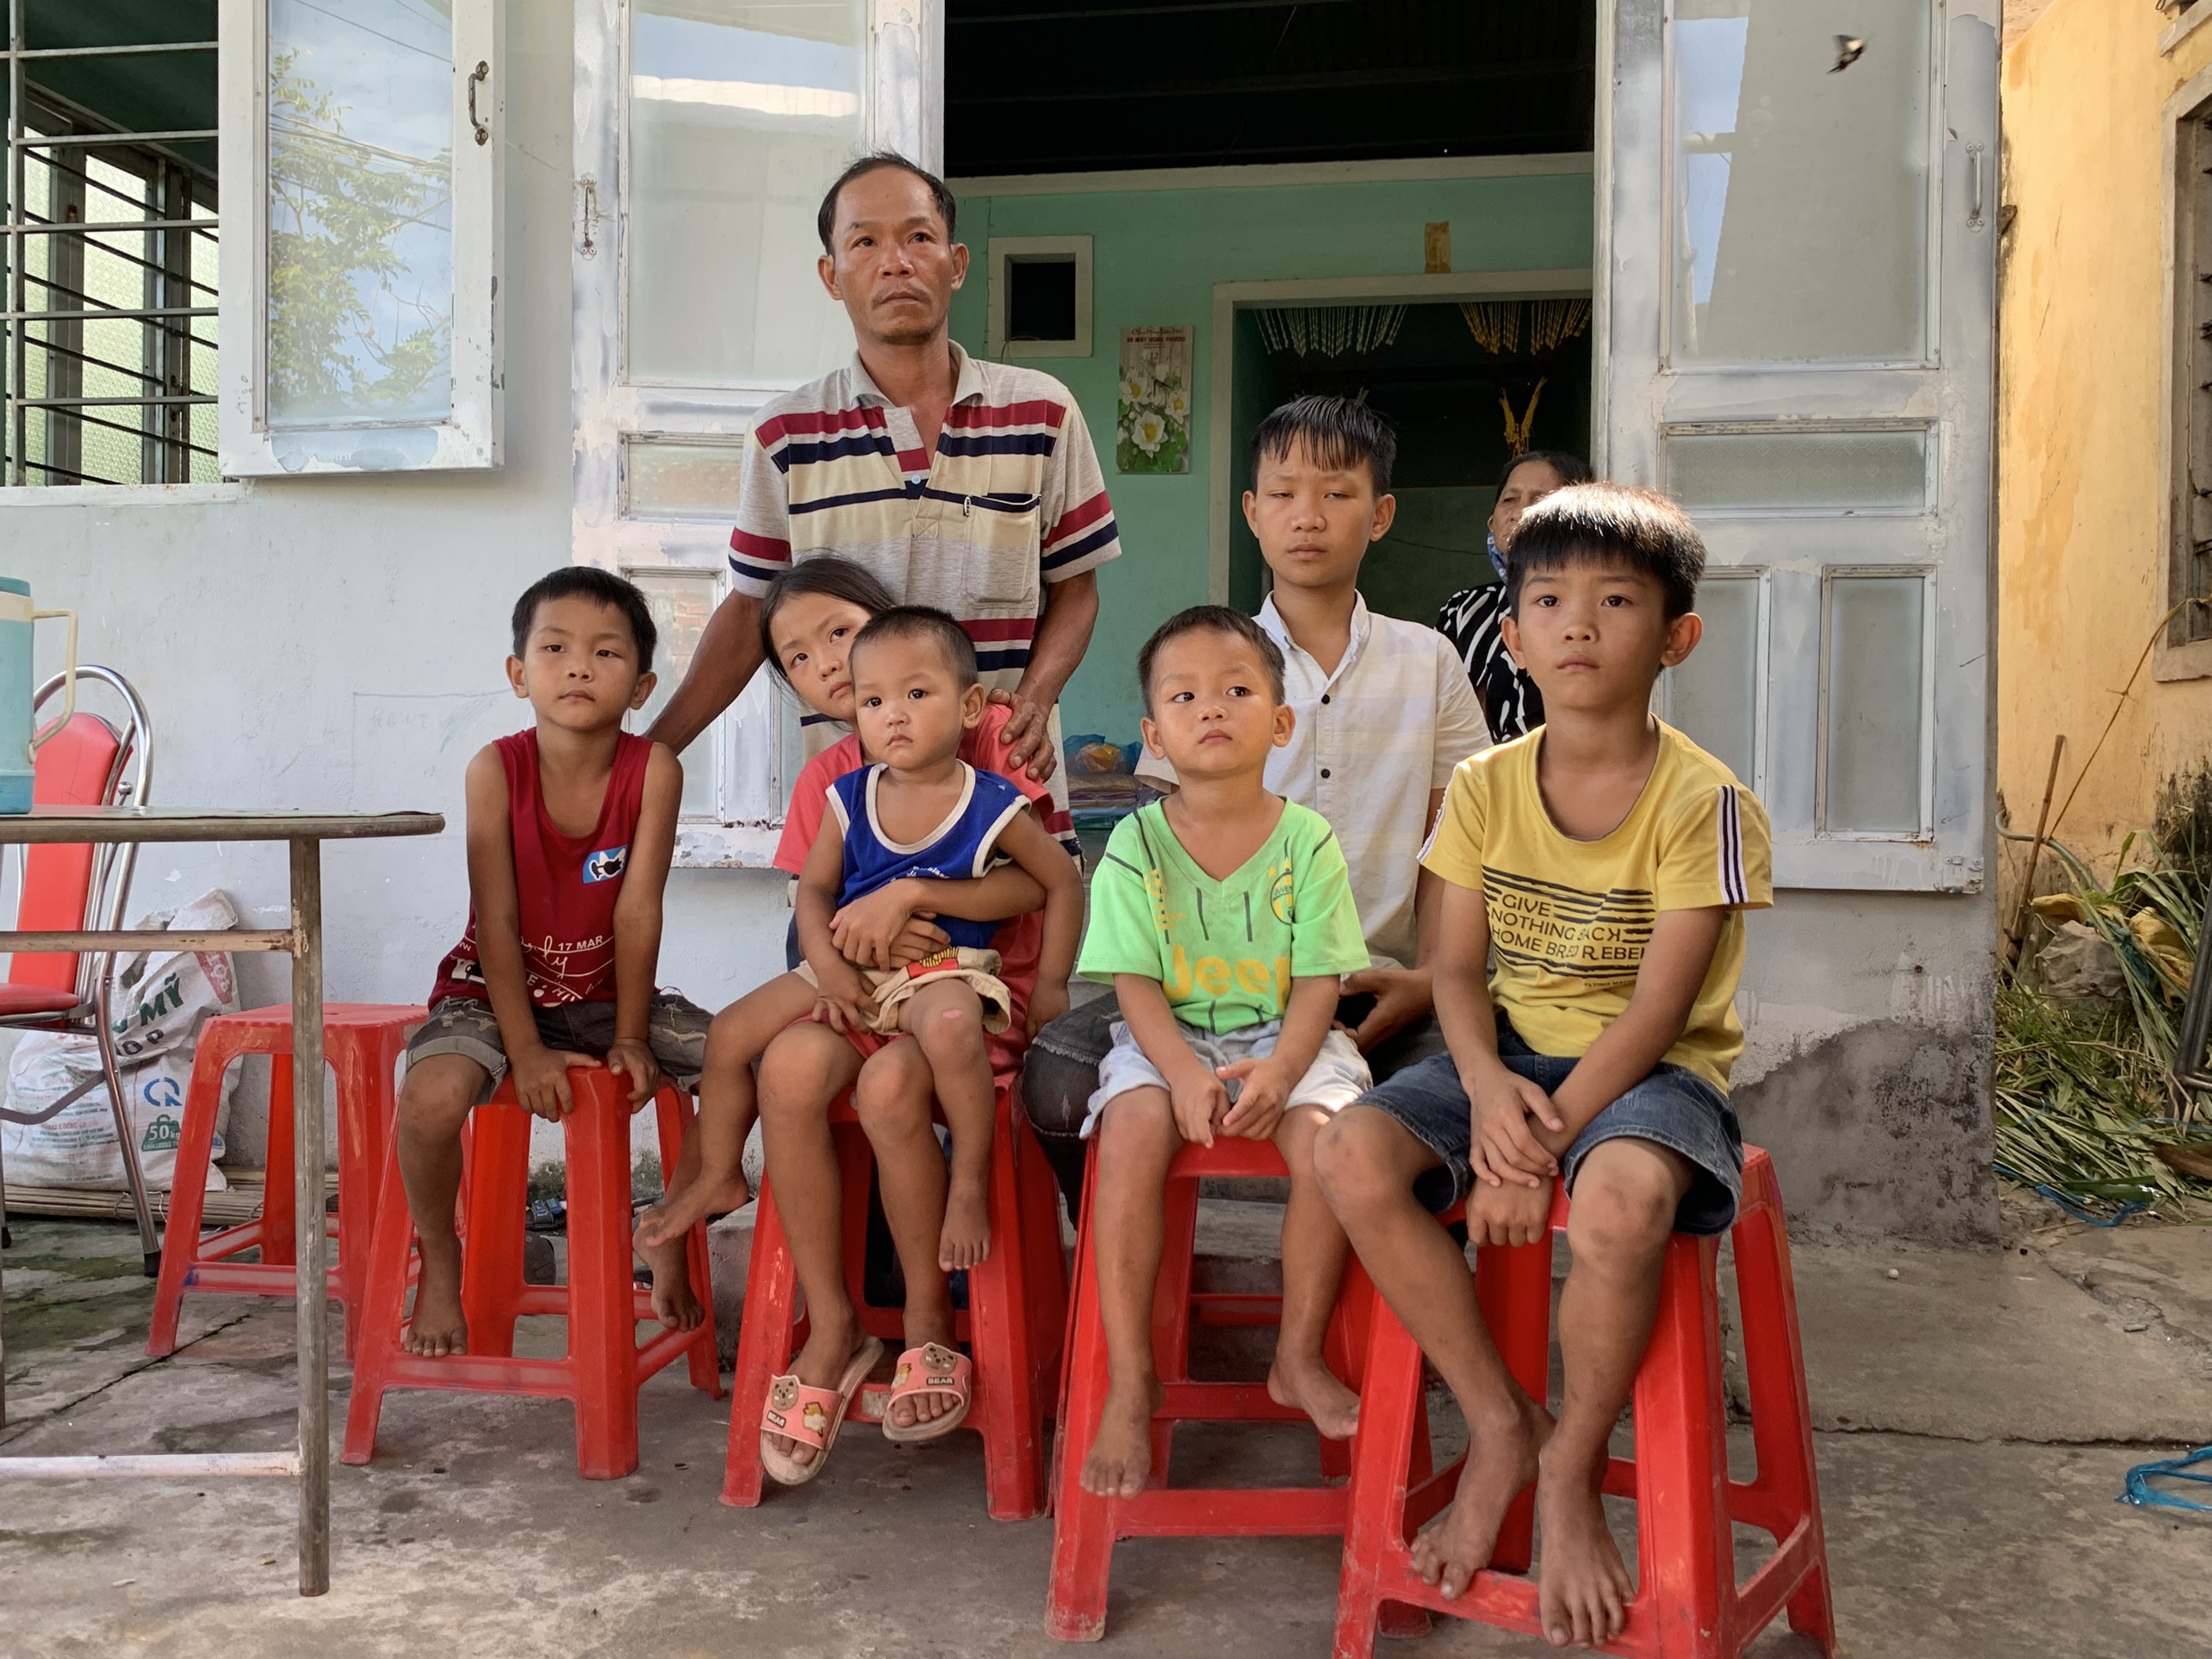 Nguyen Thi Thuy’s husband and six children at their home in Quang Ngai Province, Vietnam, July 21, 2022. Photo: Tran Mai / Tuoi Tre